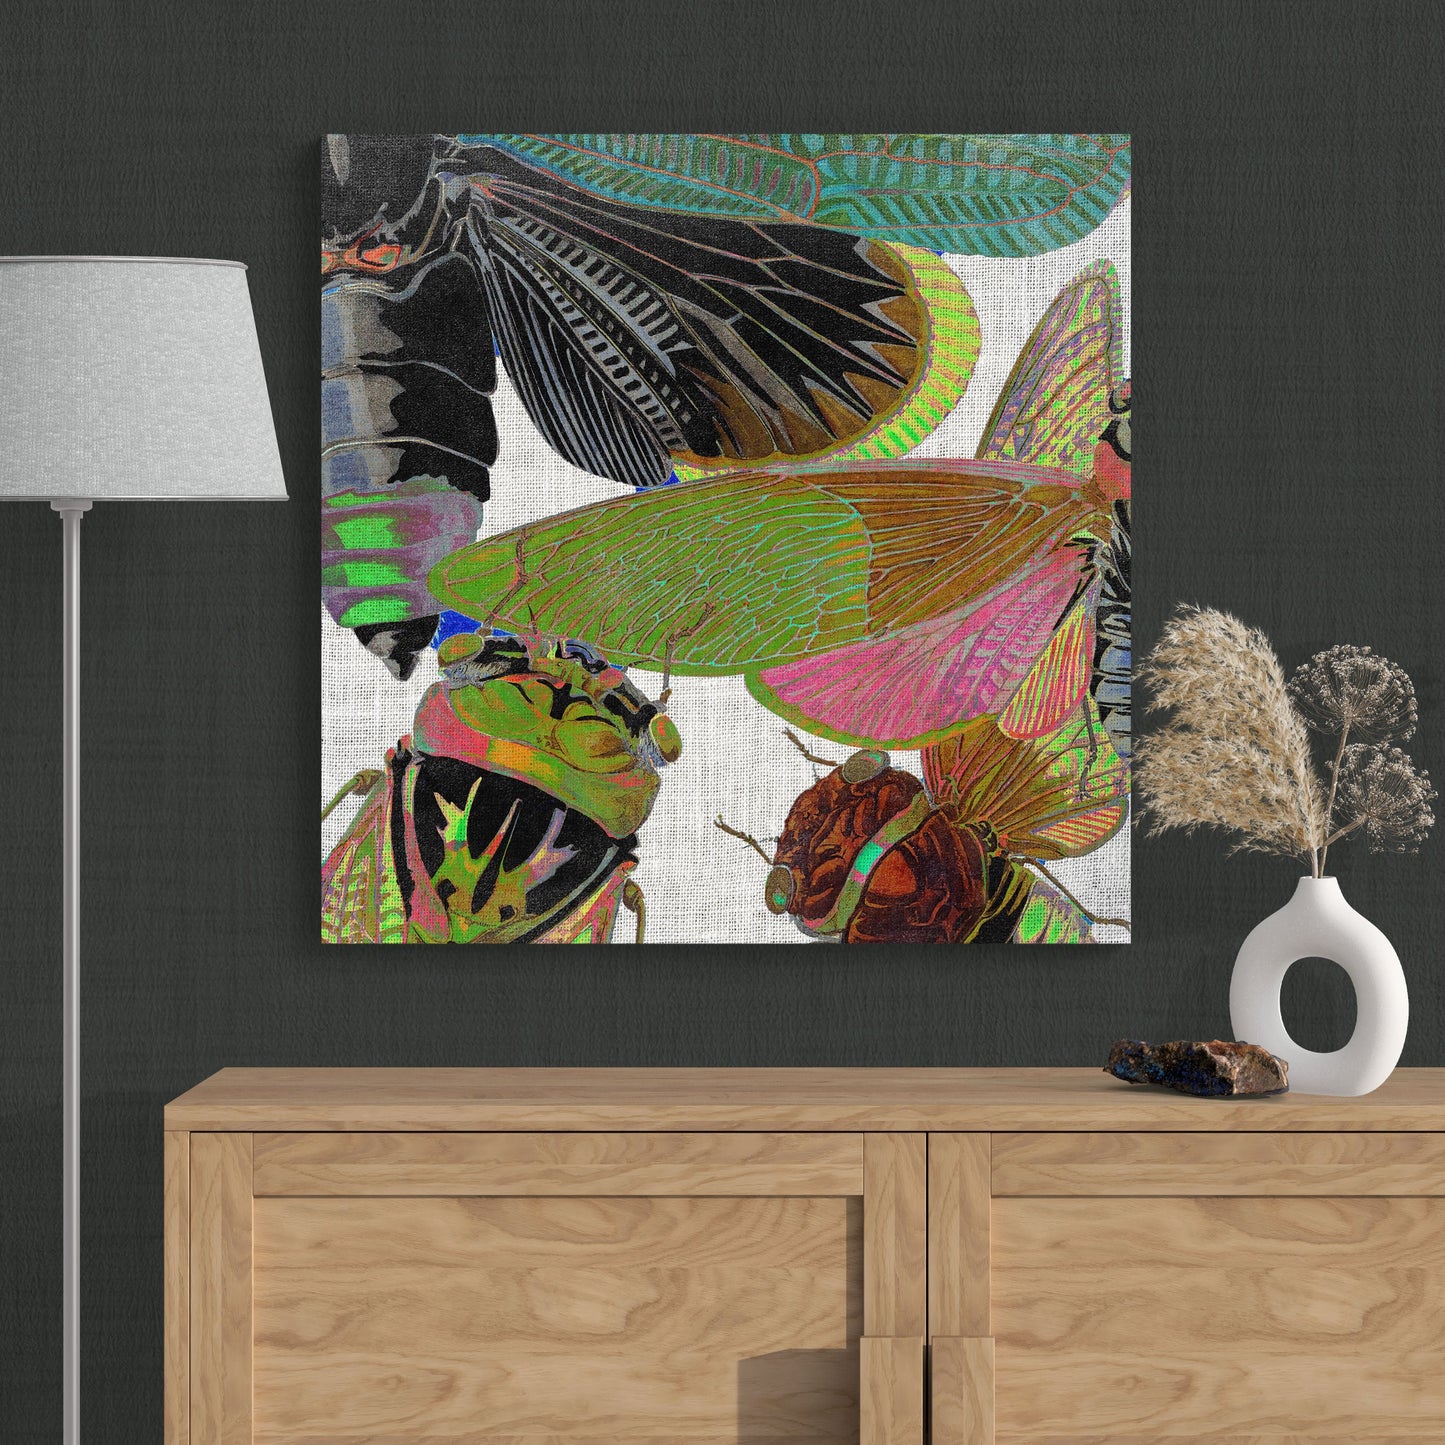 Abstract Insects Cicada Collage 1 - Colorful Nature Canvas Wall Art - Retro Reverence